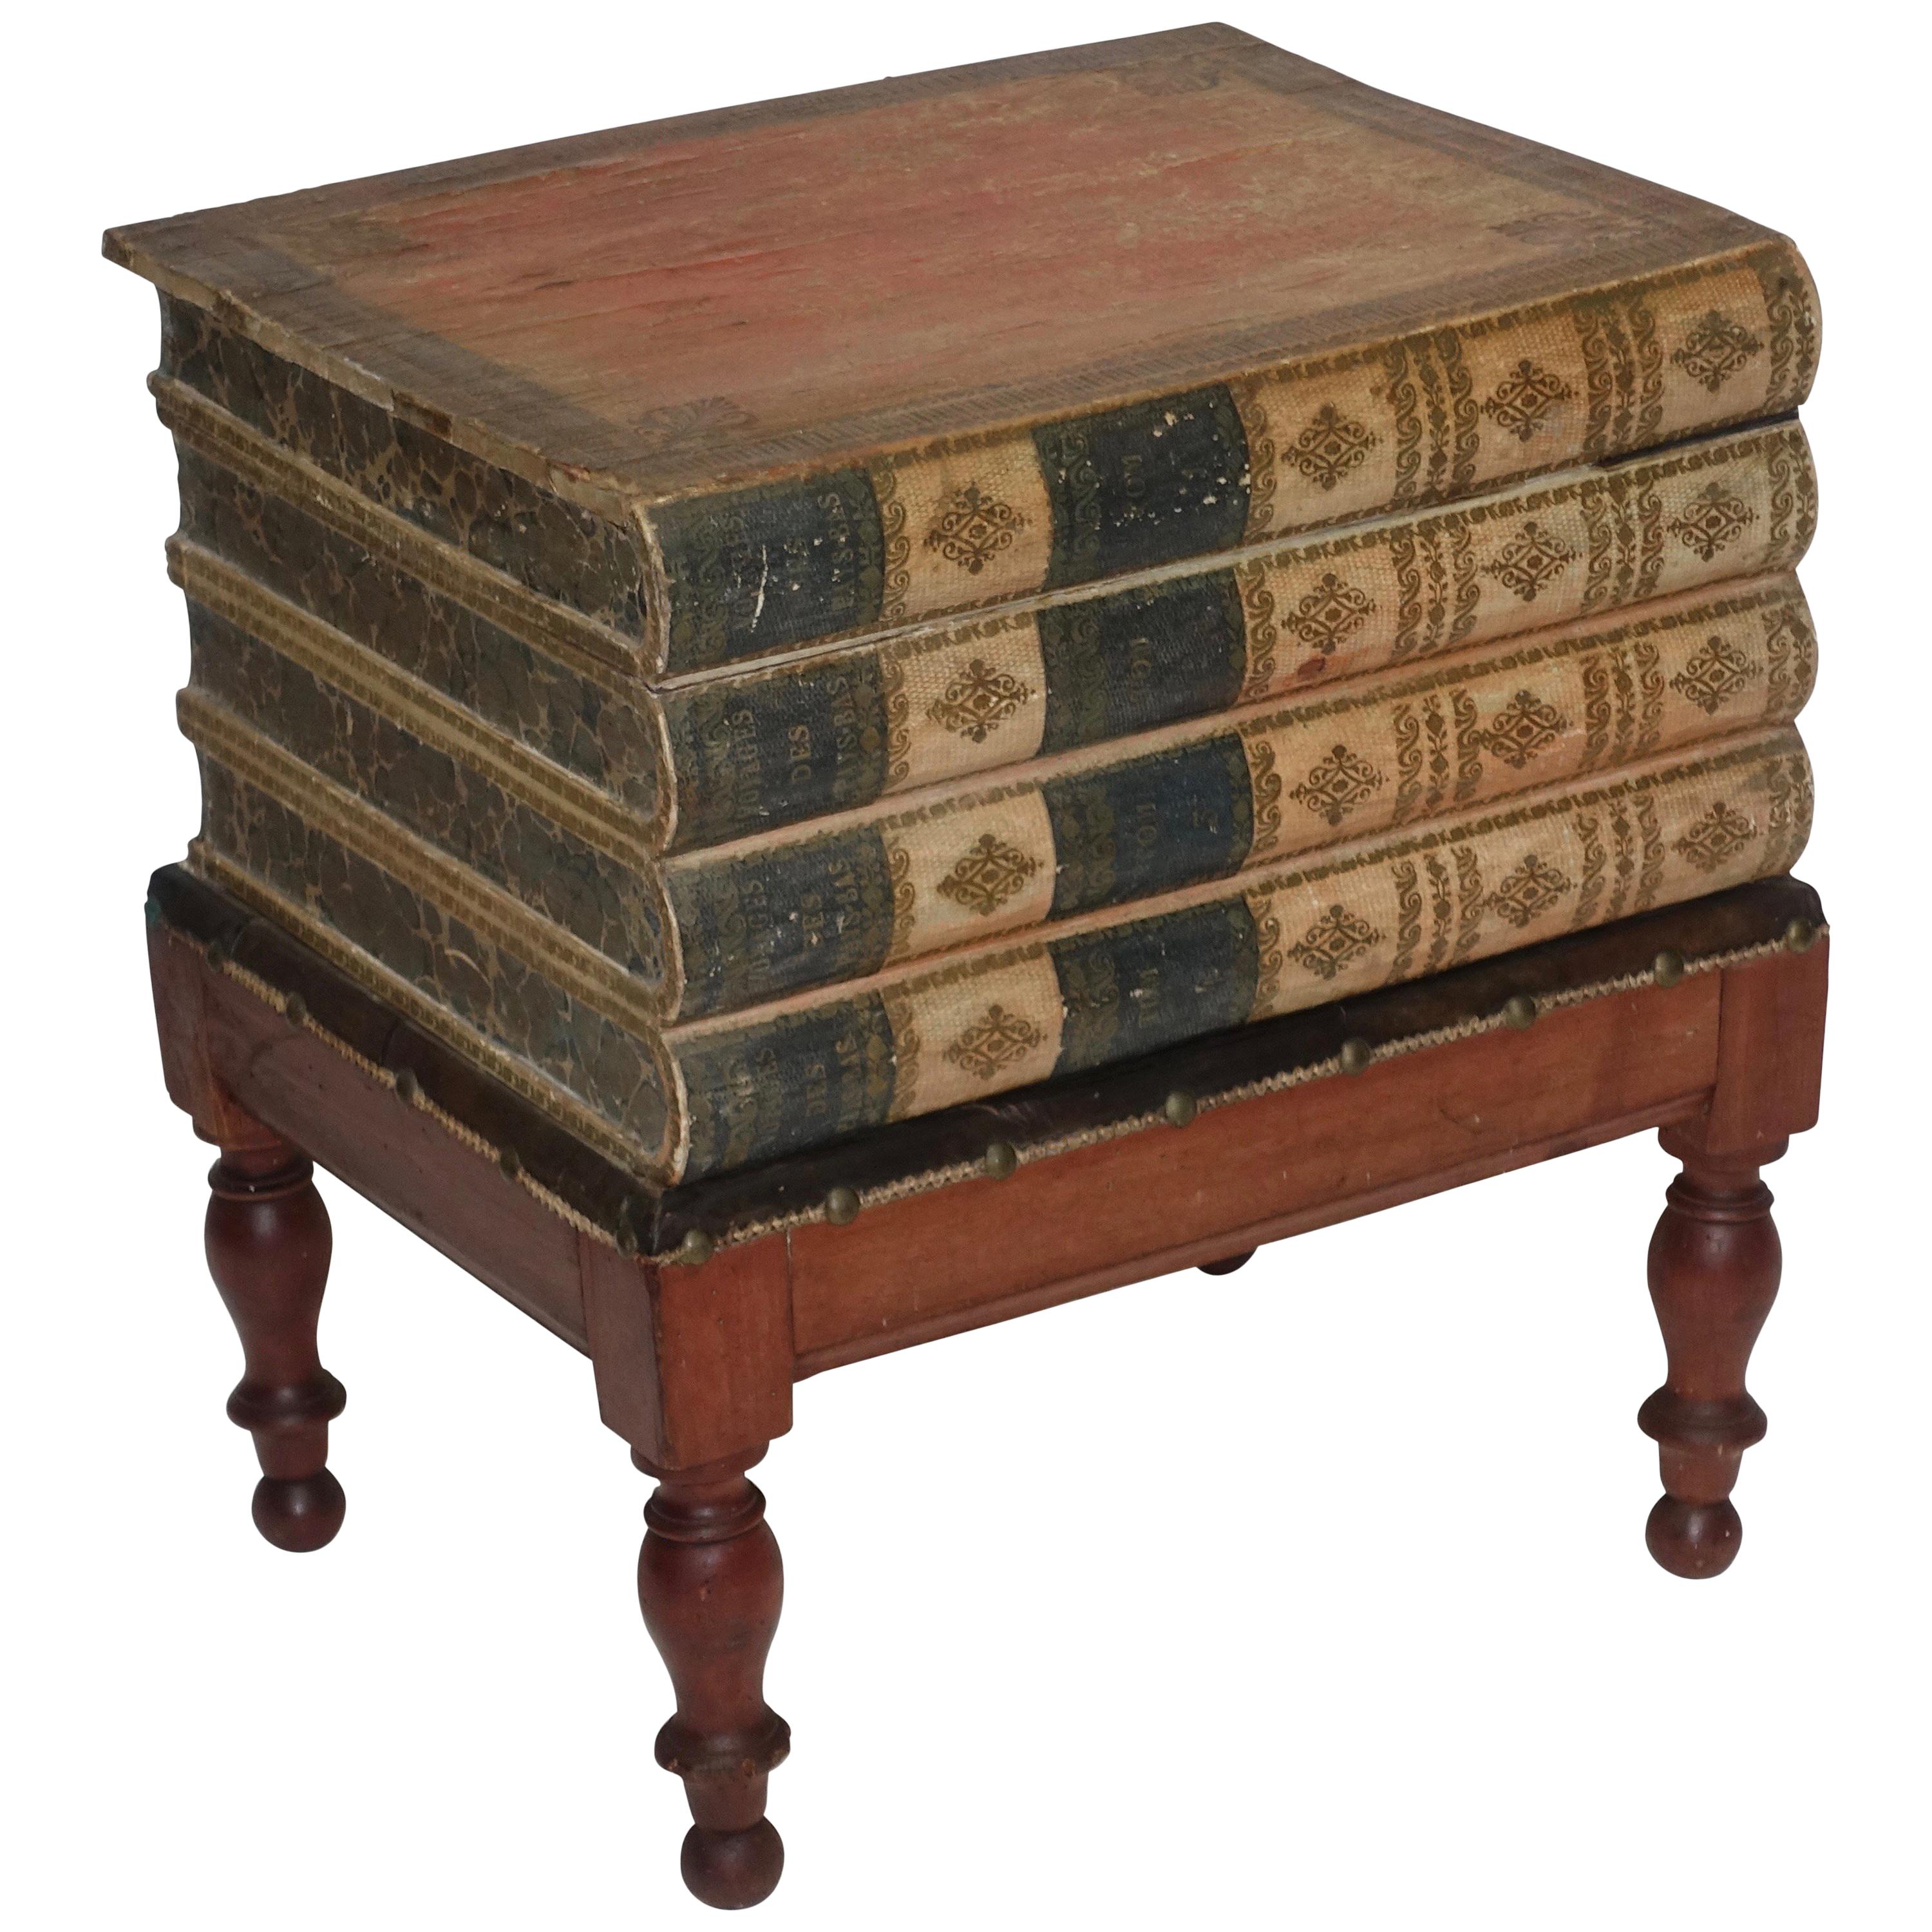 Regency Leather Faux Book Box on Painted Stand or End Table, English, circa 1830 For Sale